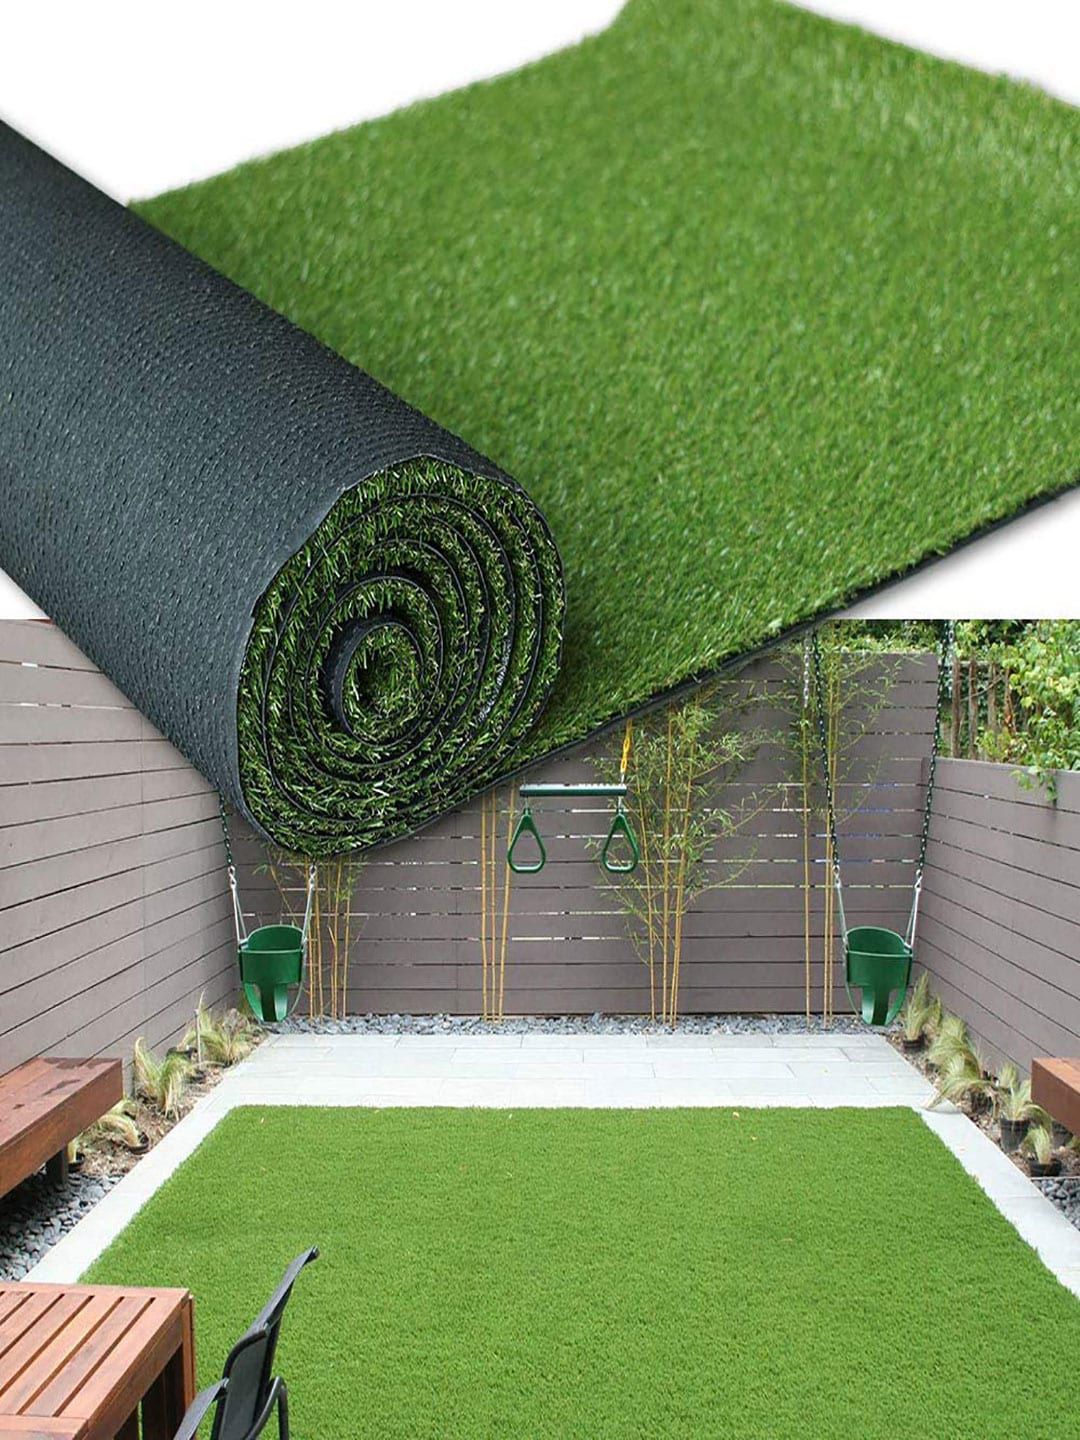 LUXEHOME INTERNATIONAL Unisex Green Artificial Grass Runner with Drainage Holes Price in India